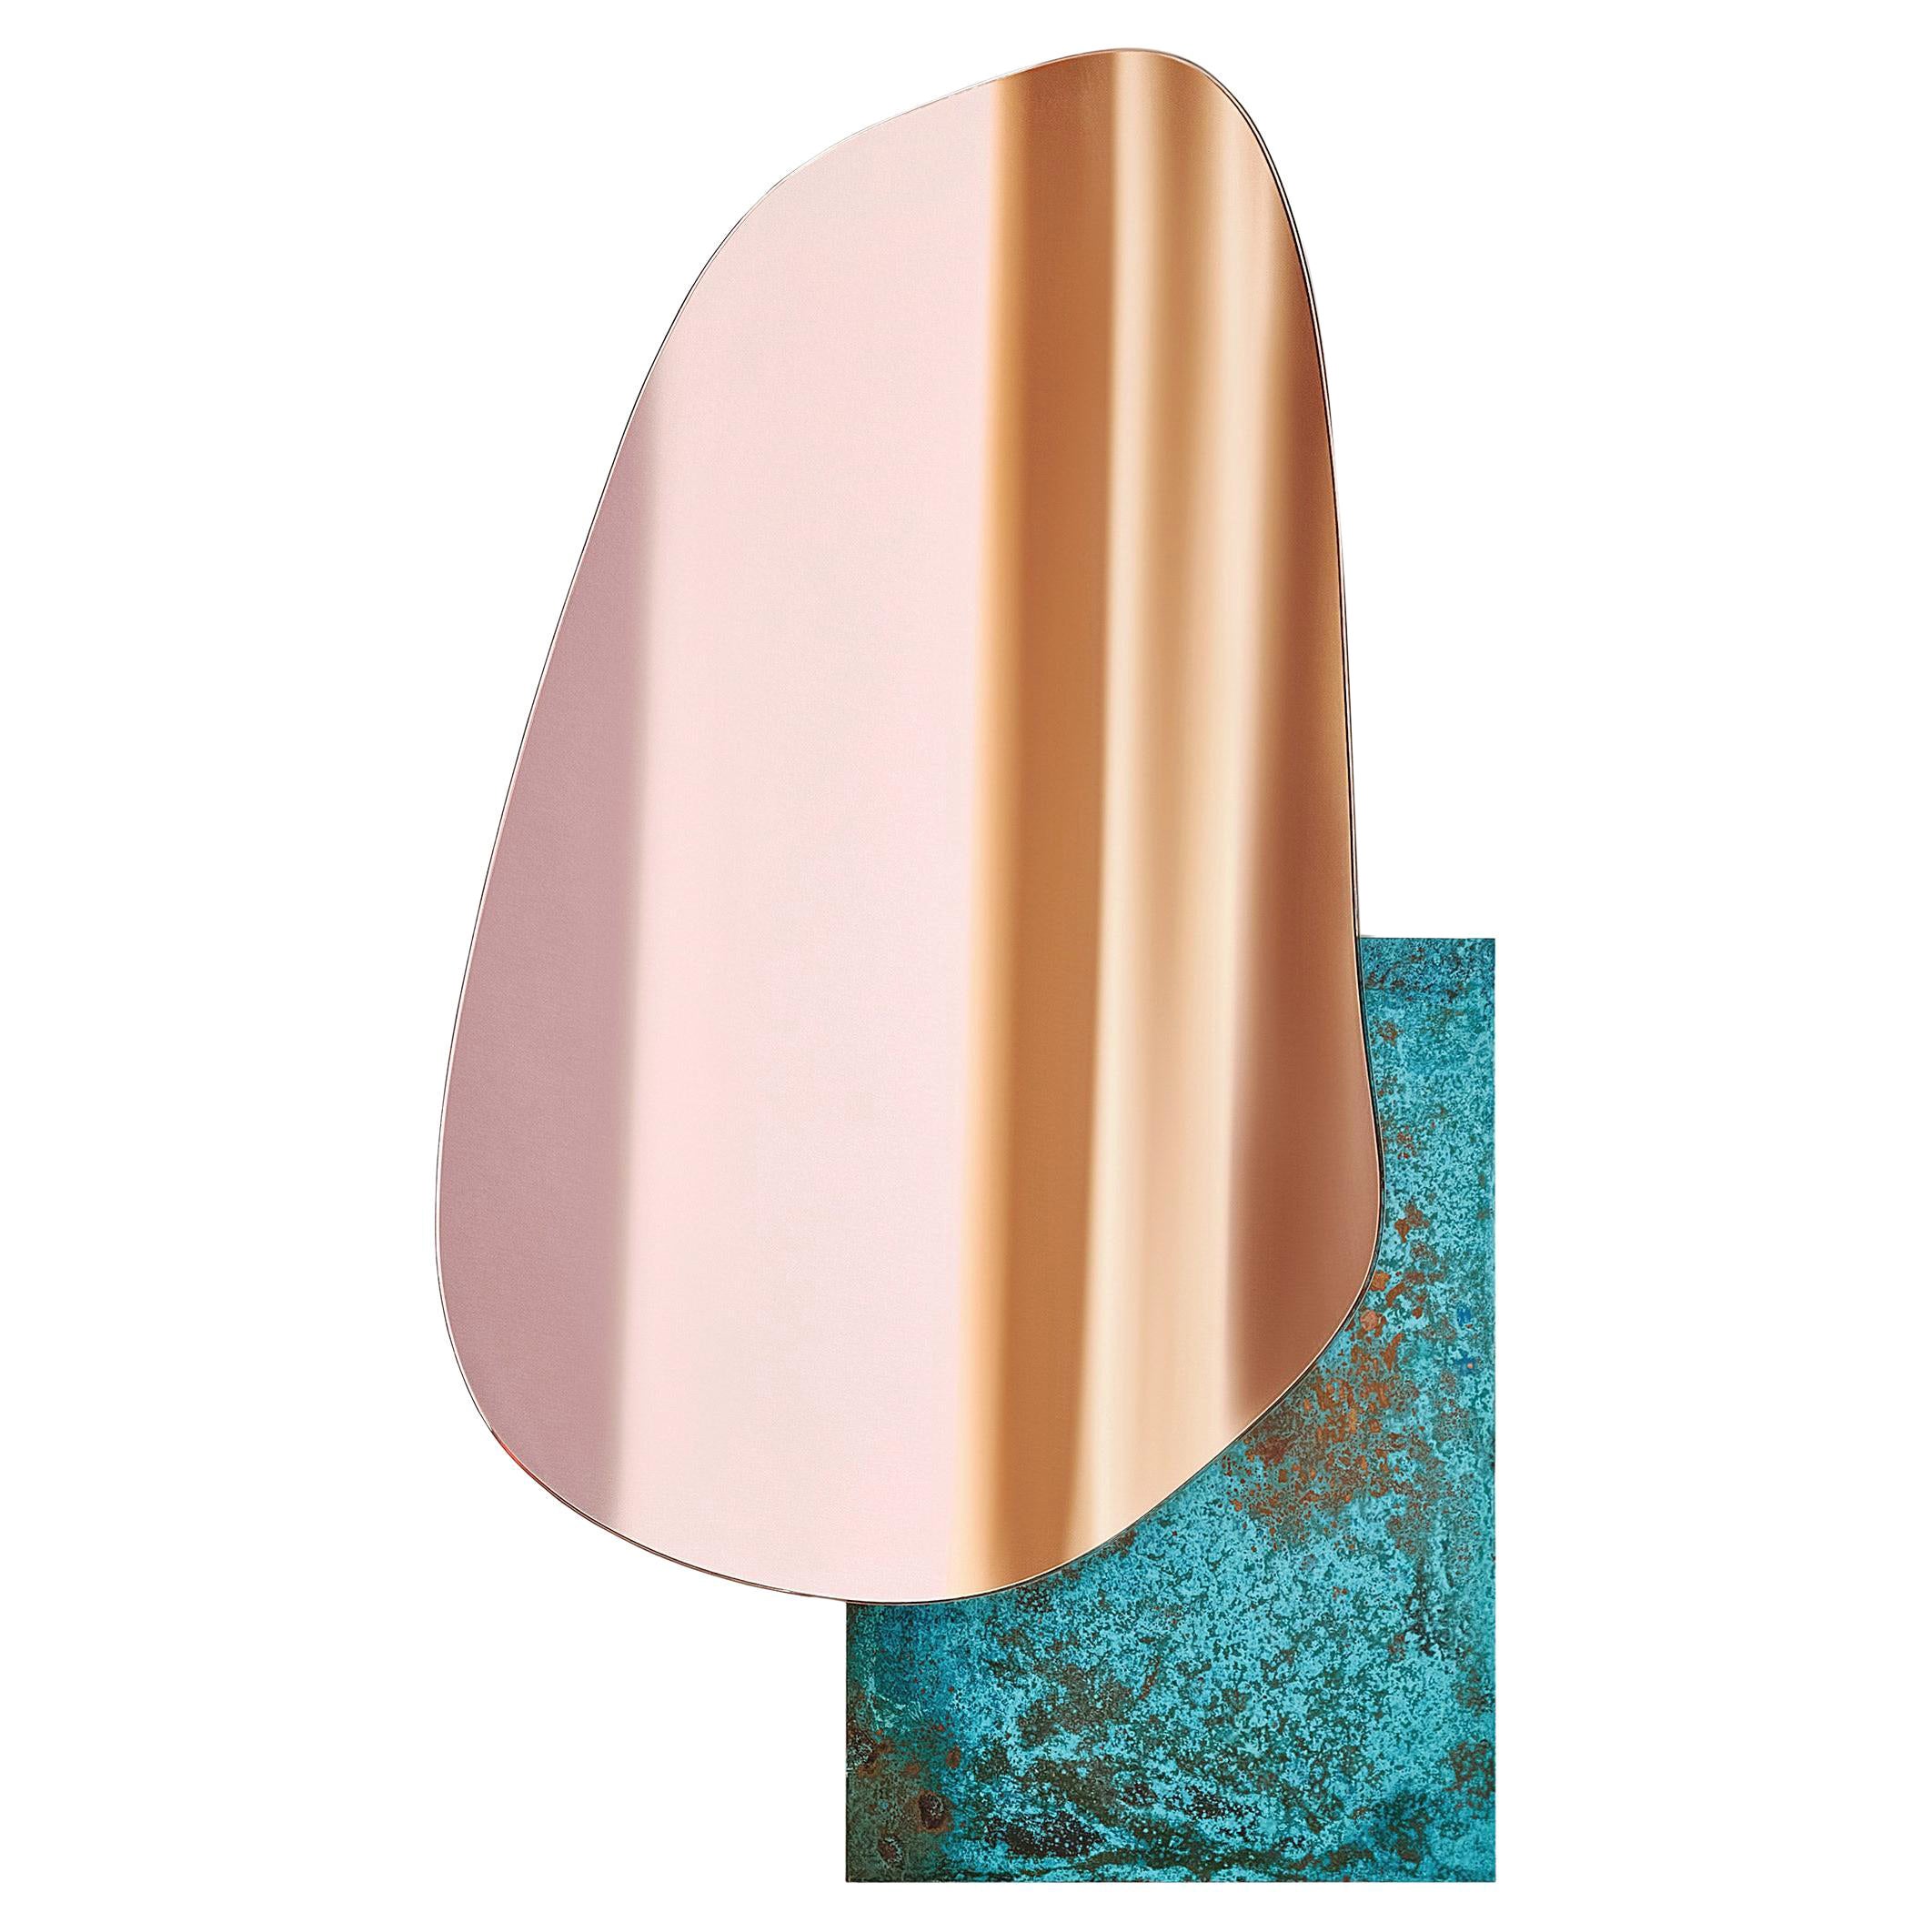 Contemporary Wall Mirror 'Lake 3' by Noom, Copper Tint with Oxidized Base For Sale